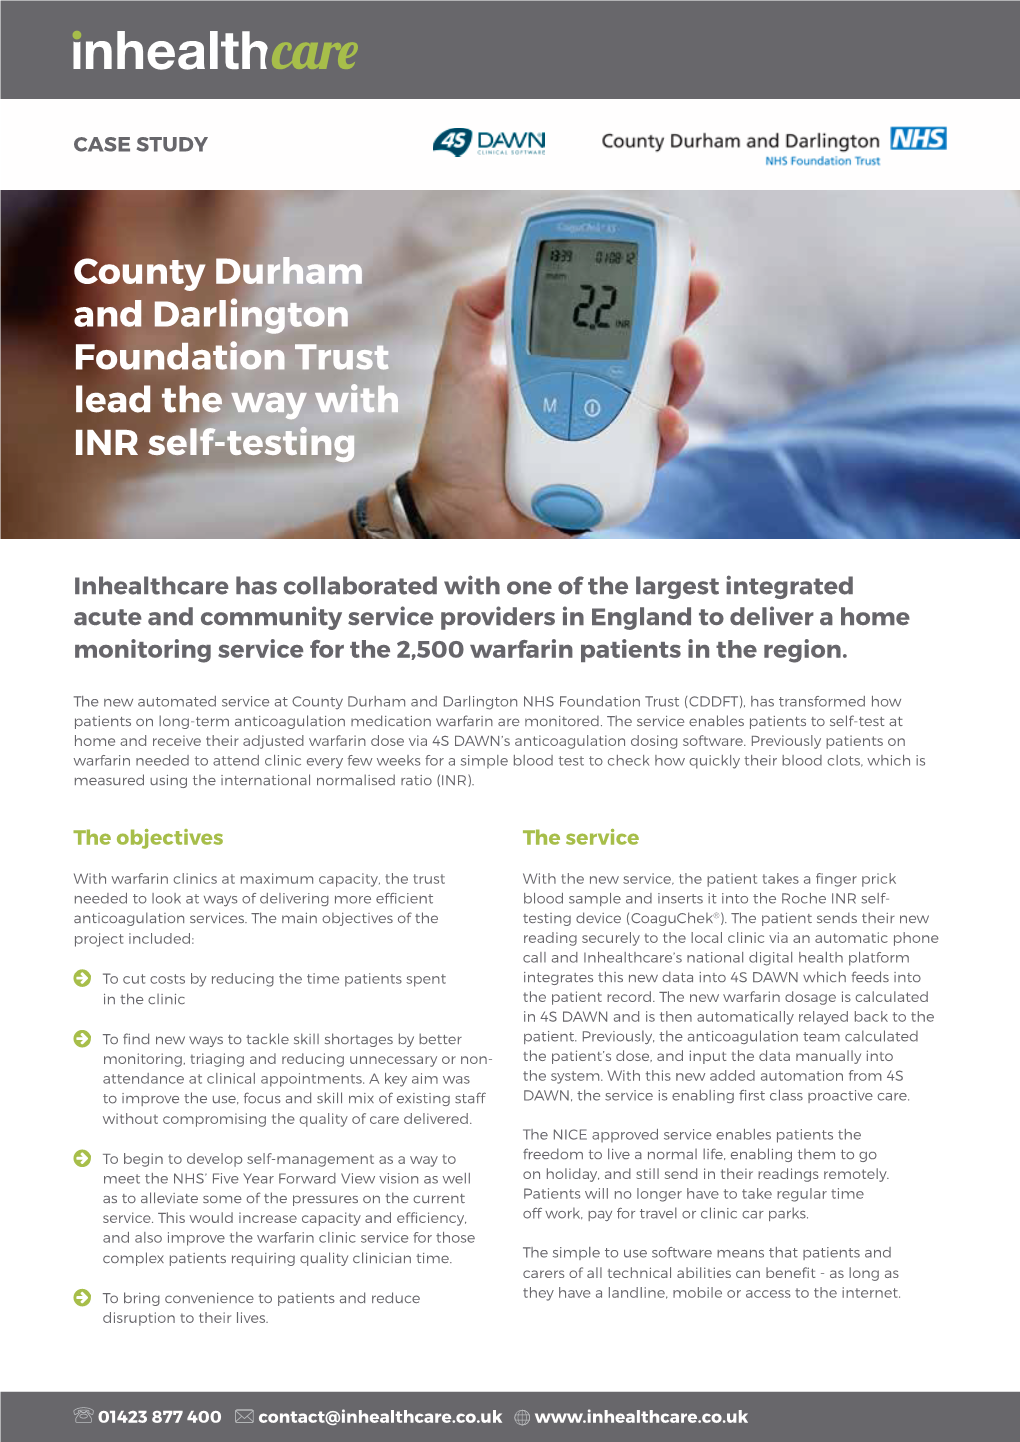 County Durham and Darlington NHS Foundation Trust Case Study